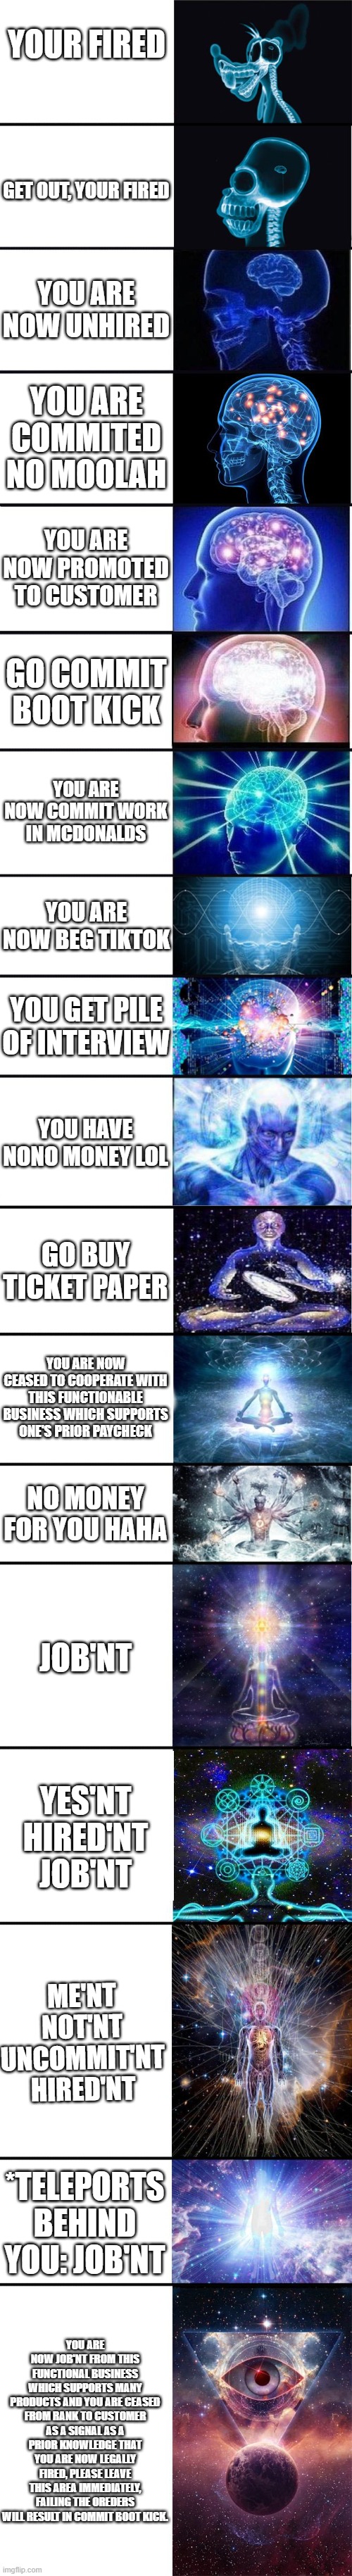 YA YEET | YOUR FIRED; GET OUT, YOUR FIRED; YOU ARE NOW UNHIRED; YOU ARE COMMITED NO MOOLAH; YOU ARE NOW PROMOTED TO CUSTOMER; GO COMMIT BOOT KICK; YOU ARE NOW COMMIT WORK IN MCDONALDS; YOU ARE NOW BEG TIKTOK; YOU GET PILE OF INTERVIEW; YOU HAVE NONO MONEY LOL; GO BUY TICKET PAPER; YOU ARE NOW CEASED TO COOPERATE WITH THIS FUNCTIONABLE BUSINESS WHICH SUPPORTS ONE'S PRIOR PAYCHECK; NO MONEY FOR YOU HAHA; JOB'NT; YES'NT HIRED'NT JOB'NT; ME'NT NOT'NT UNCOMMIT'NT HIRED'NT; *TELEPORTS BEHIND YOU: JOB'NT; YOU ARE NOW JOB'NT FROM THIS FUNCTIONAL BUSINESS WHICH SUPPORTS MANY PRODUCTS AND YOU ARE CEASED FROM RANK TO CUSTOMER AS A SIGNAL AS A PRIOR KNOWLEDGE THAT YOU ARE NOW LEGALLY FIRED, PLEASE LEAVE THIS AREA IMMEDIATELY, FAILING THE OREDERS WILL RESULT IN COMMIT BOOT KICK. | image tagged in expanding brain 9001 | made w/ Imgflip meme maker